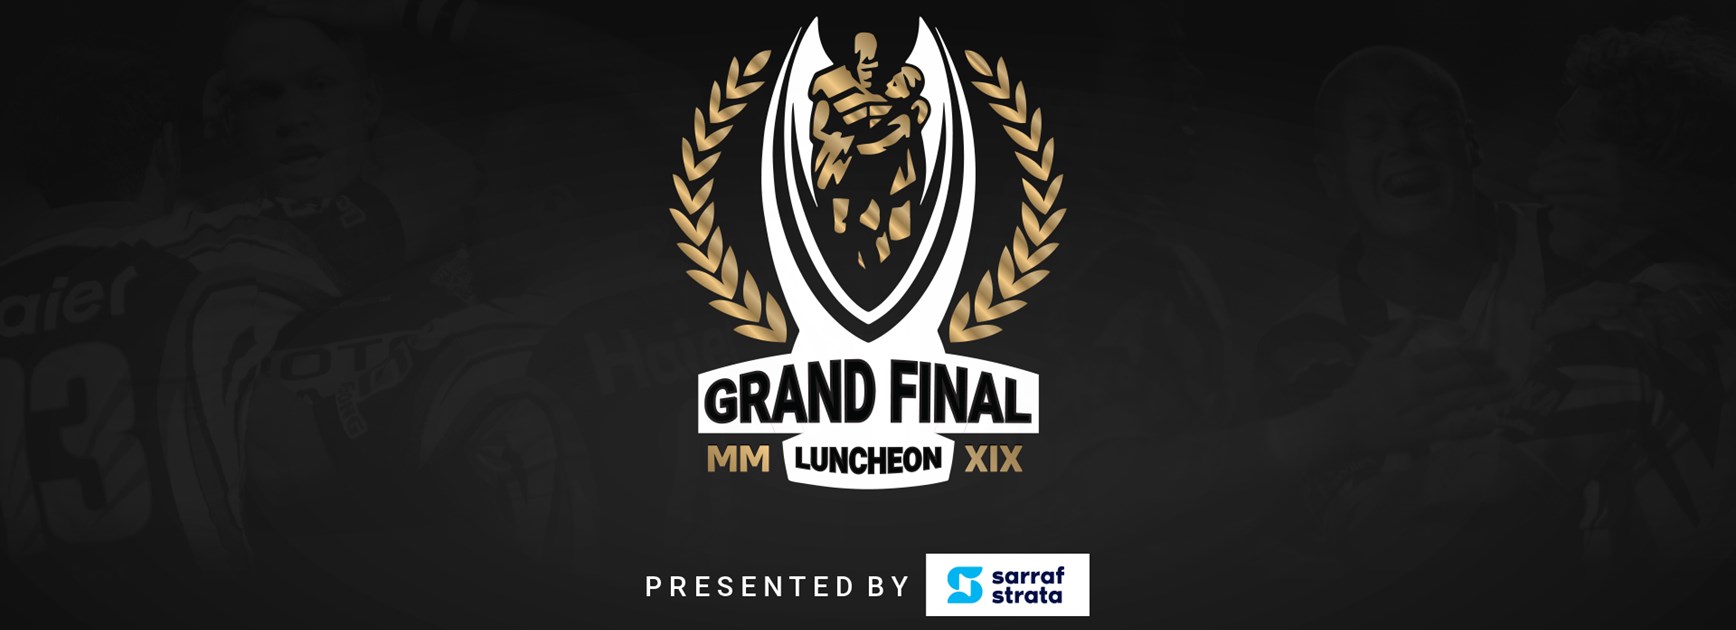 Grand Final Luncheon tickets on sale now!